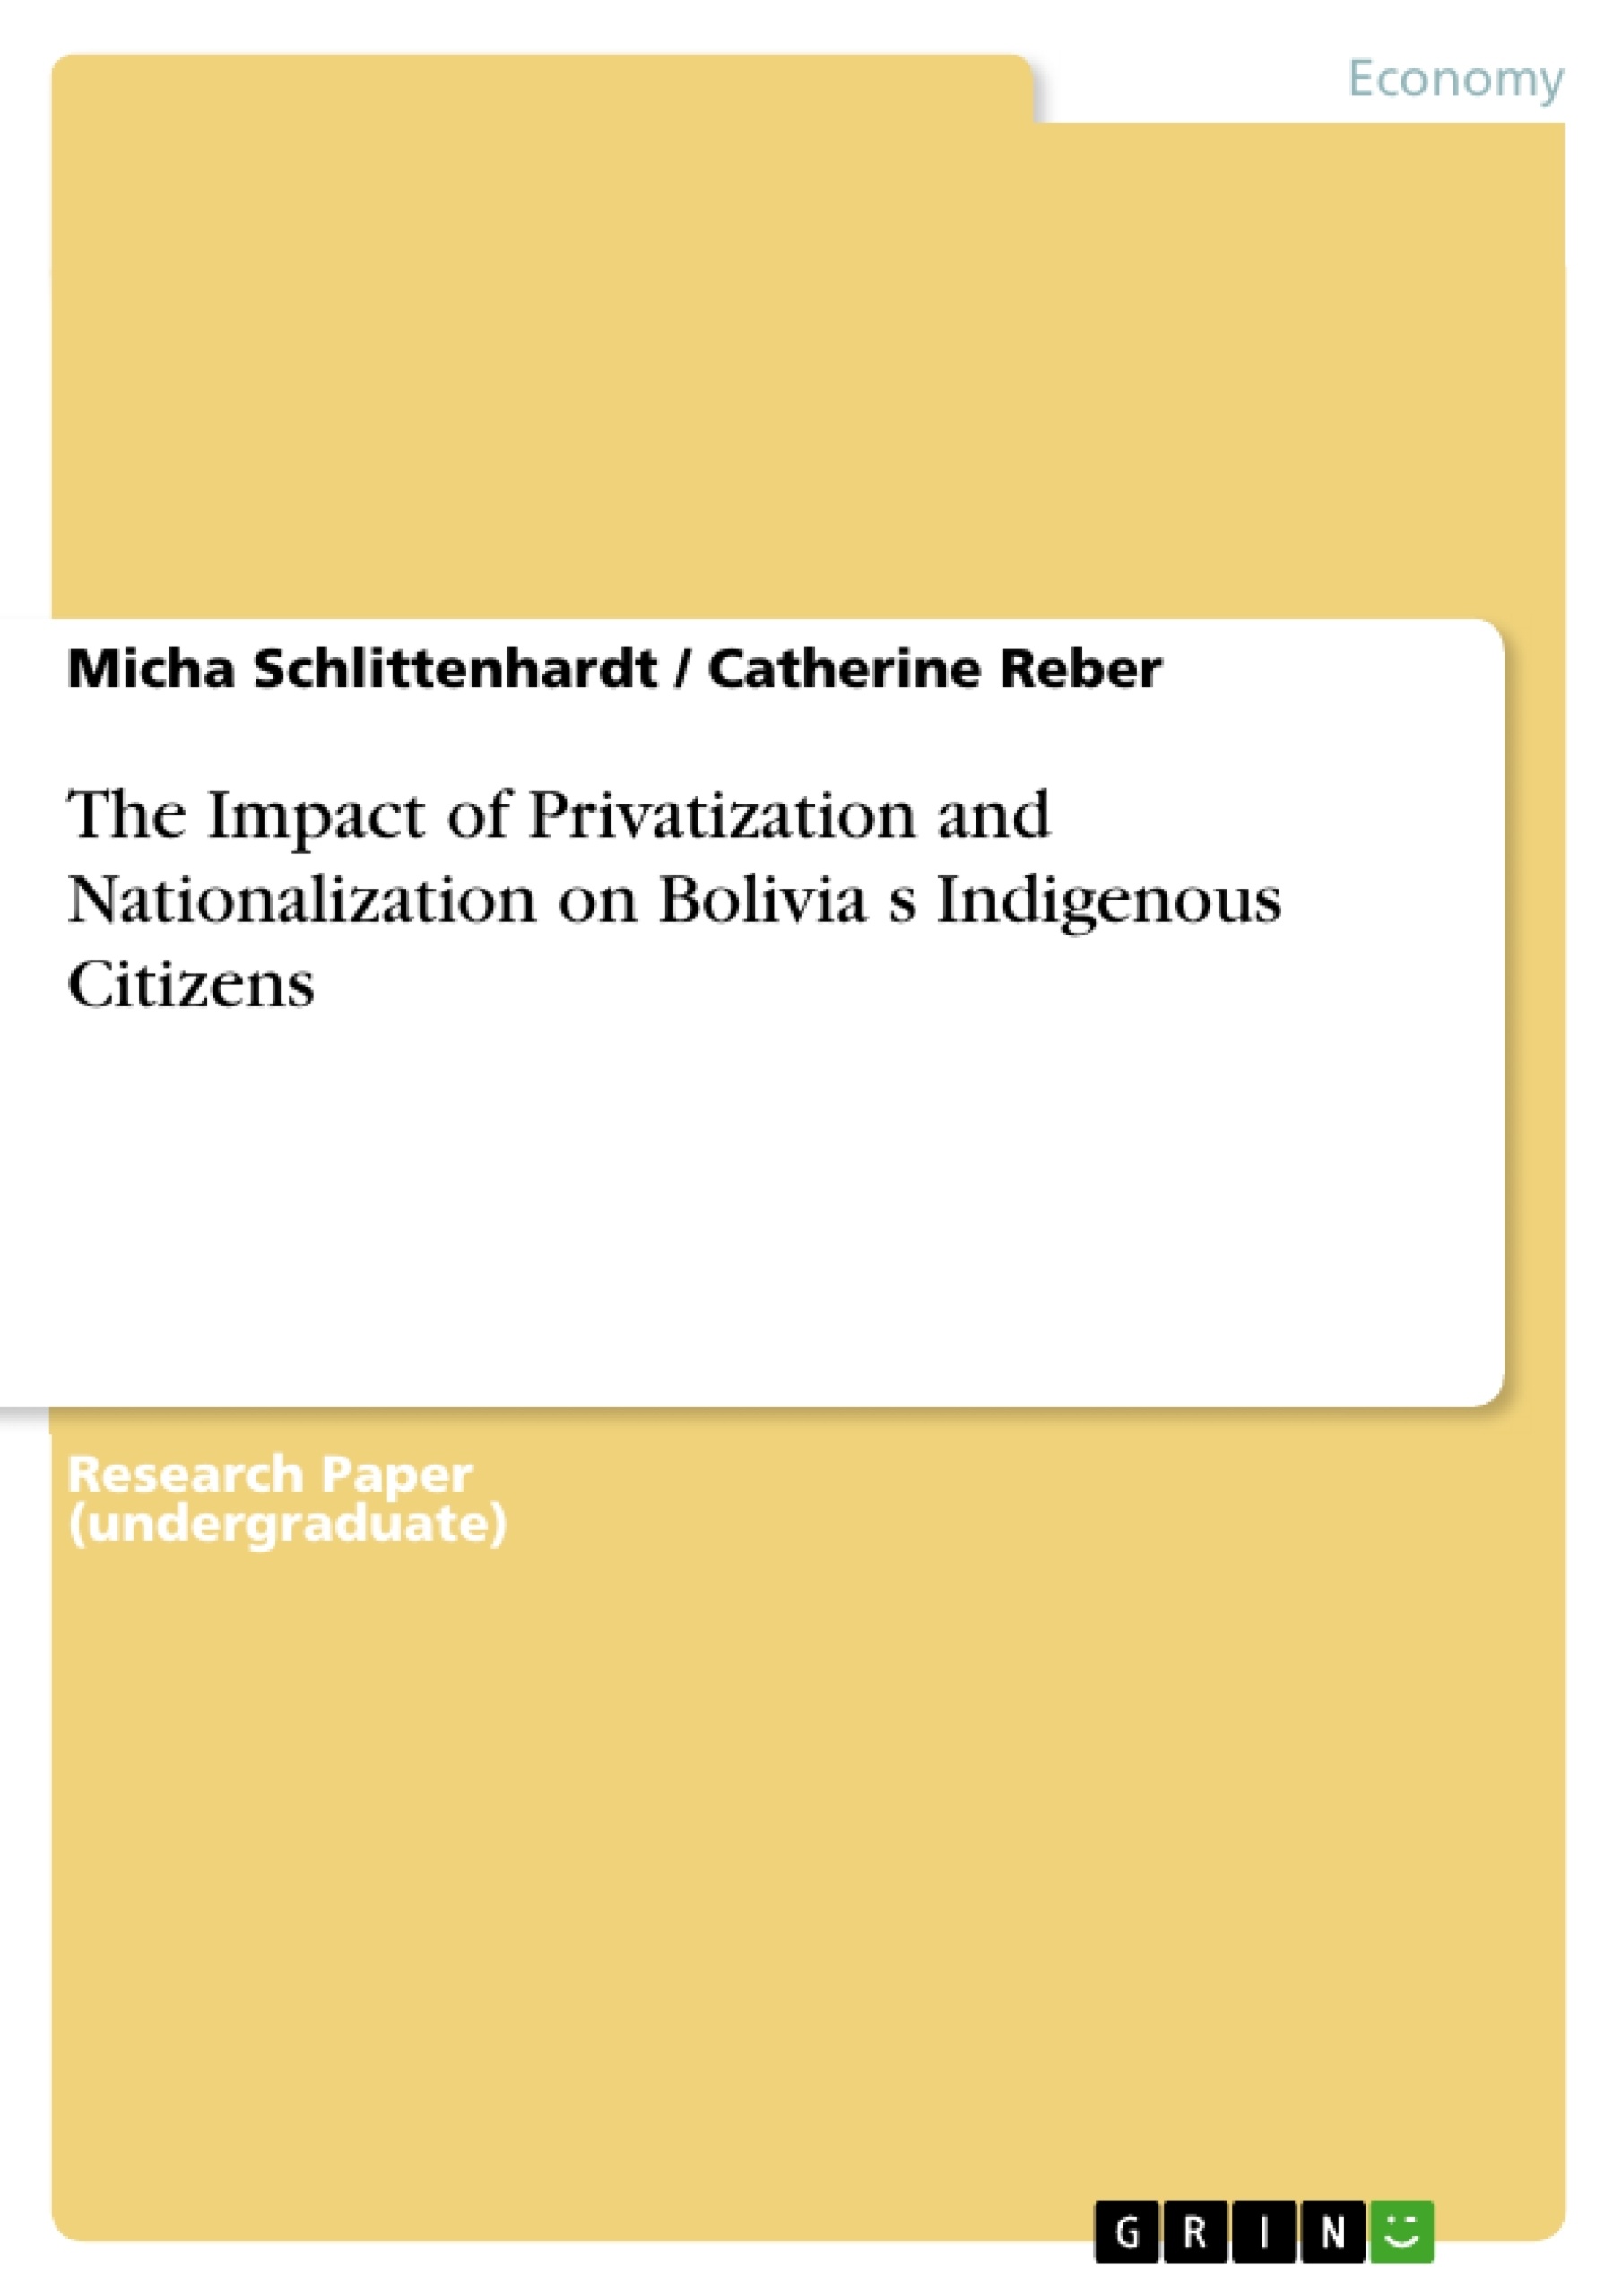 Title: The Impact of Privatization and Nationalization on Boliviaʻs Indigenous Citizens